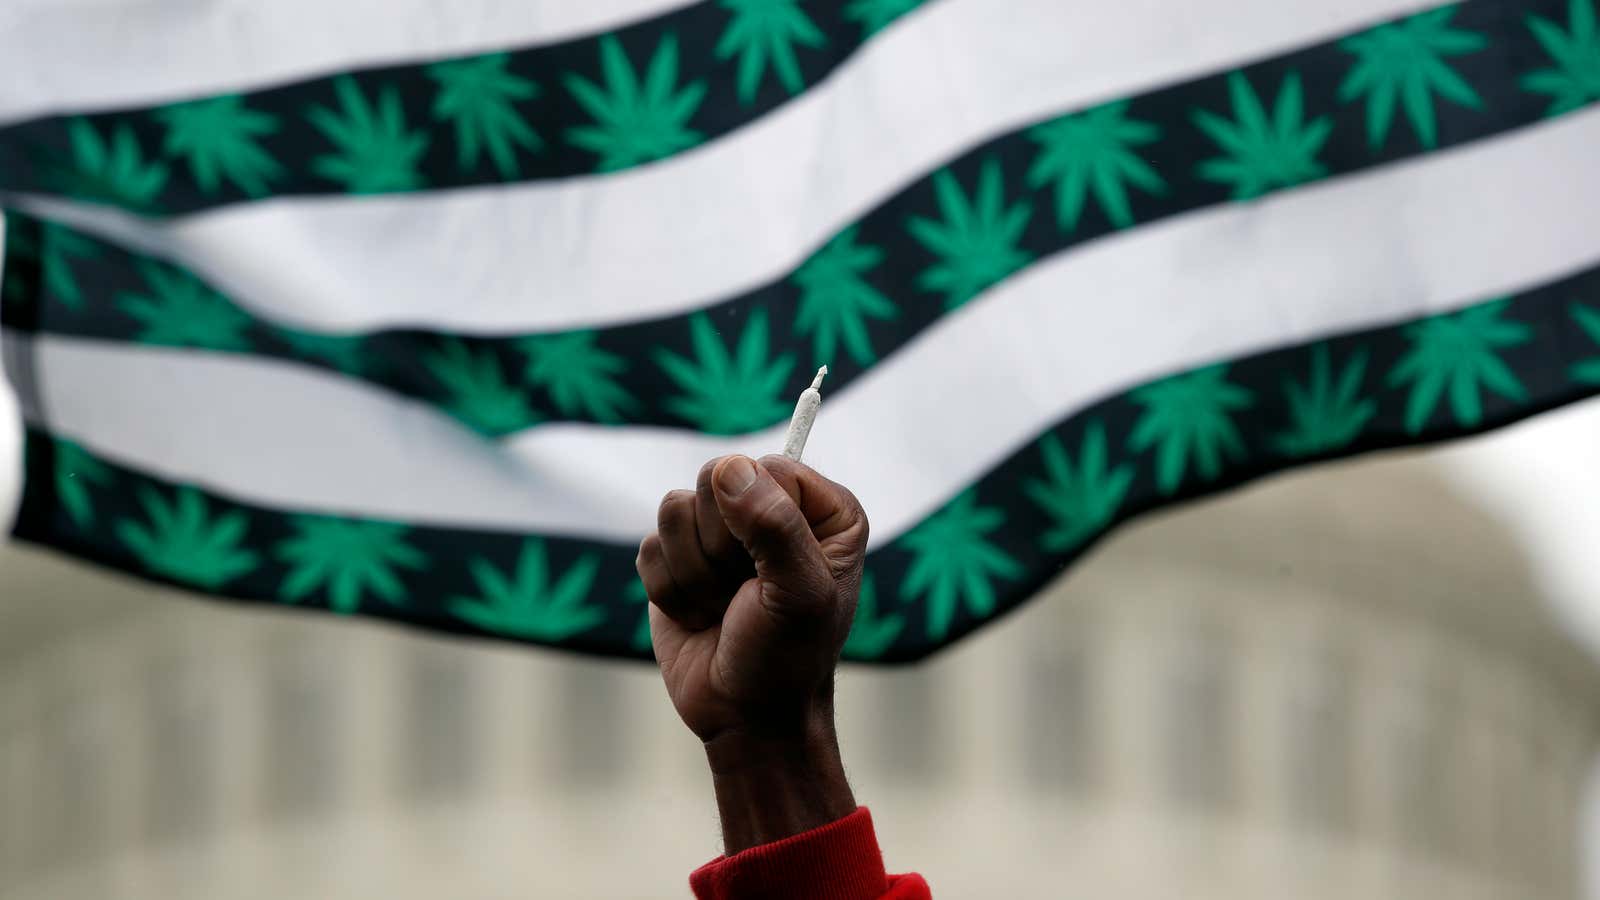 Lawmakers may block New York’s cannabis legalization if it doesn’t address racial inequity